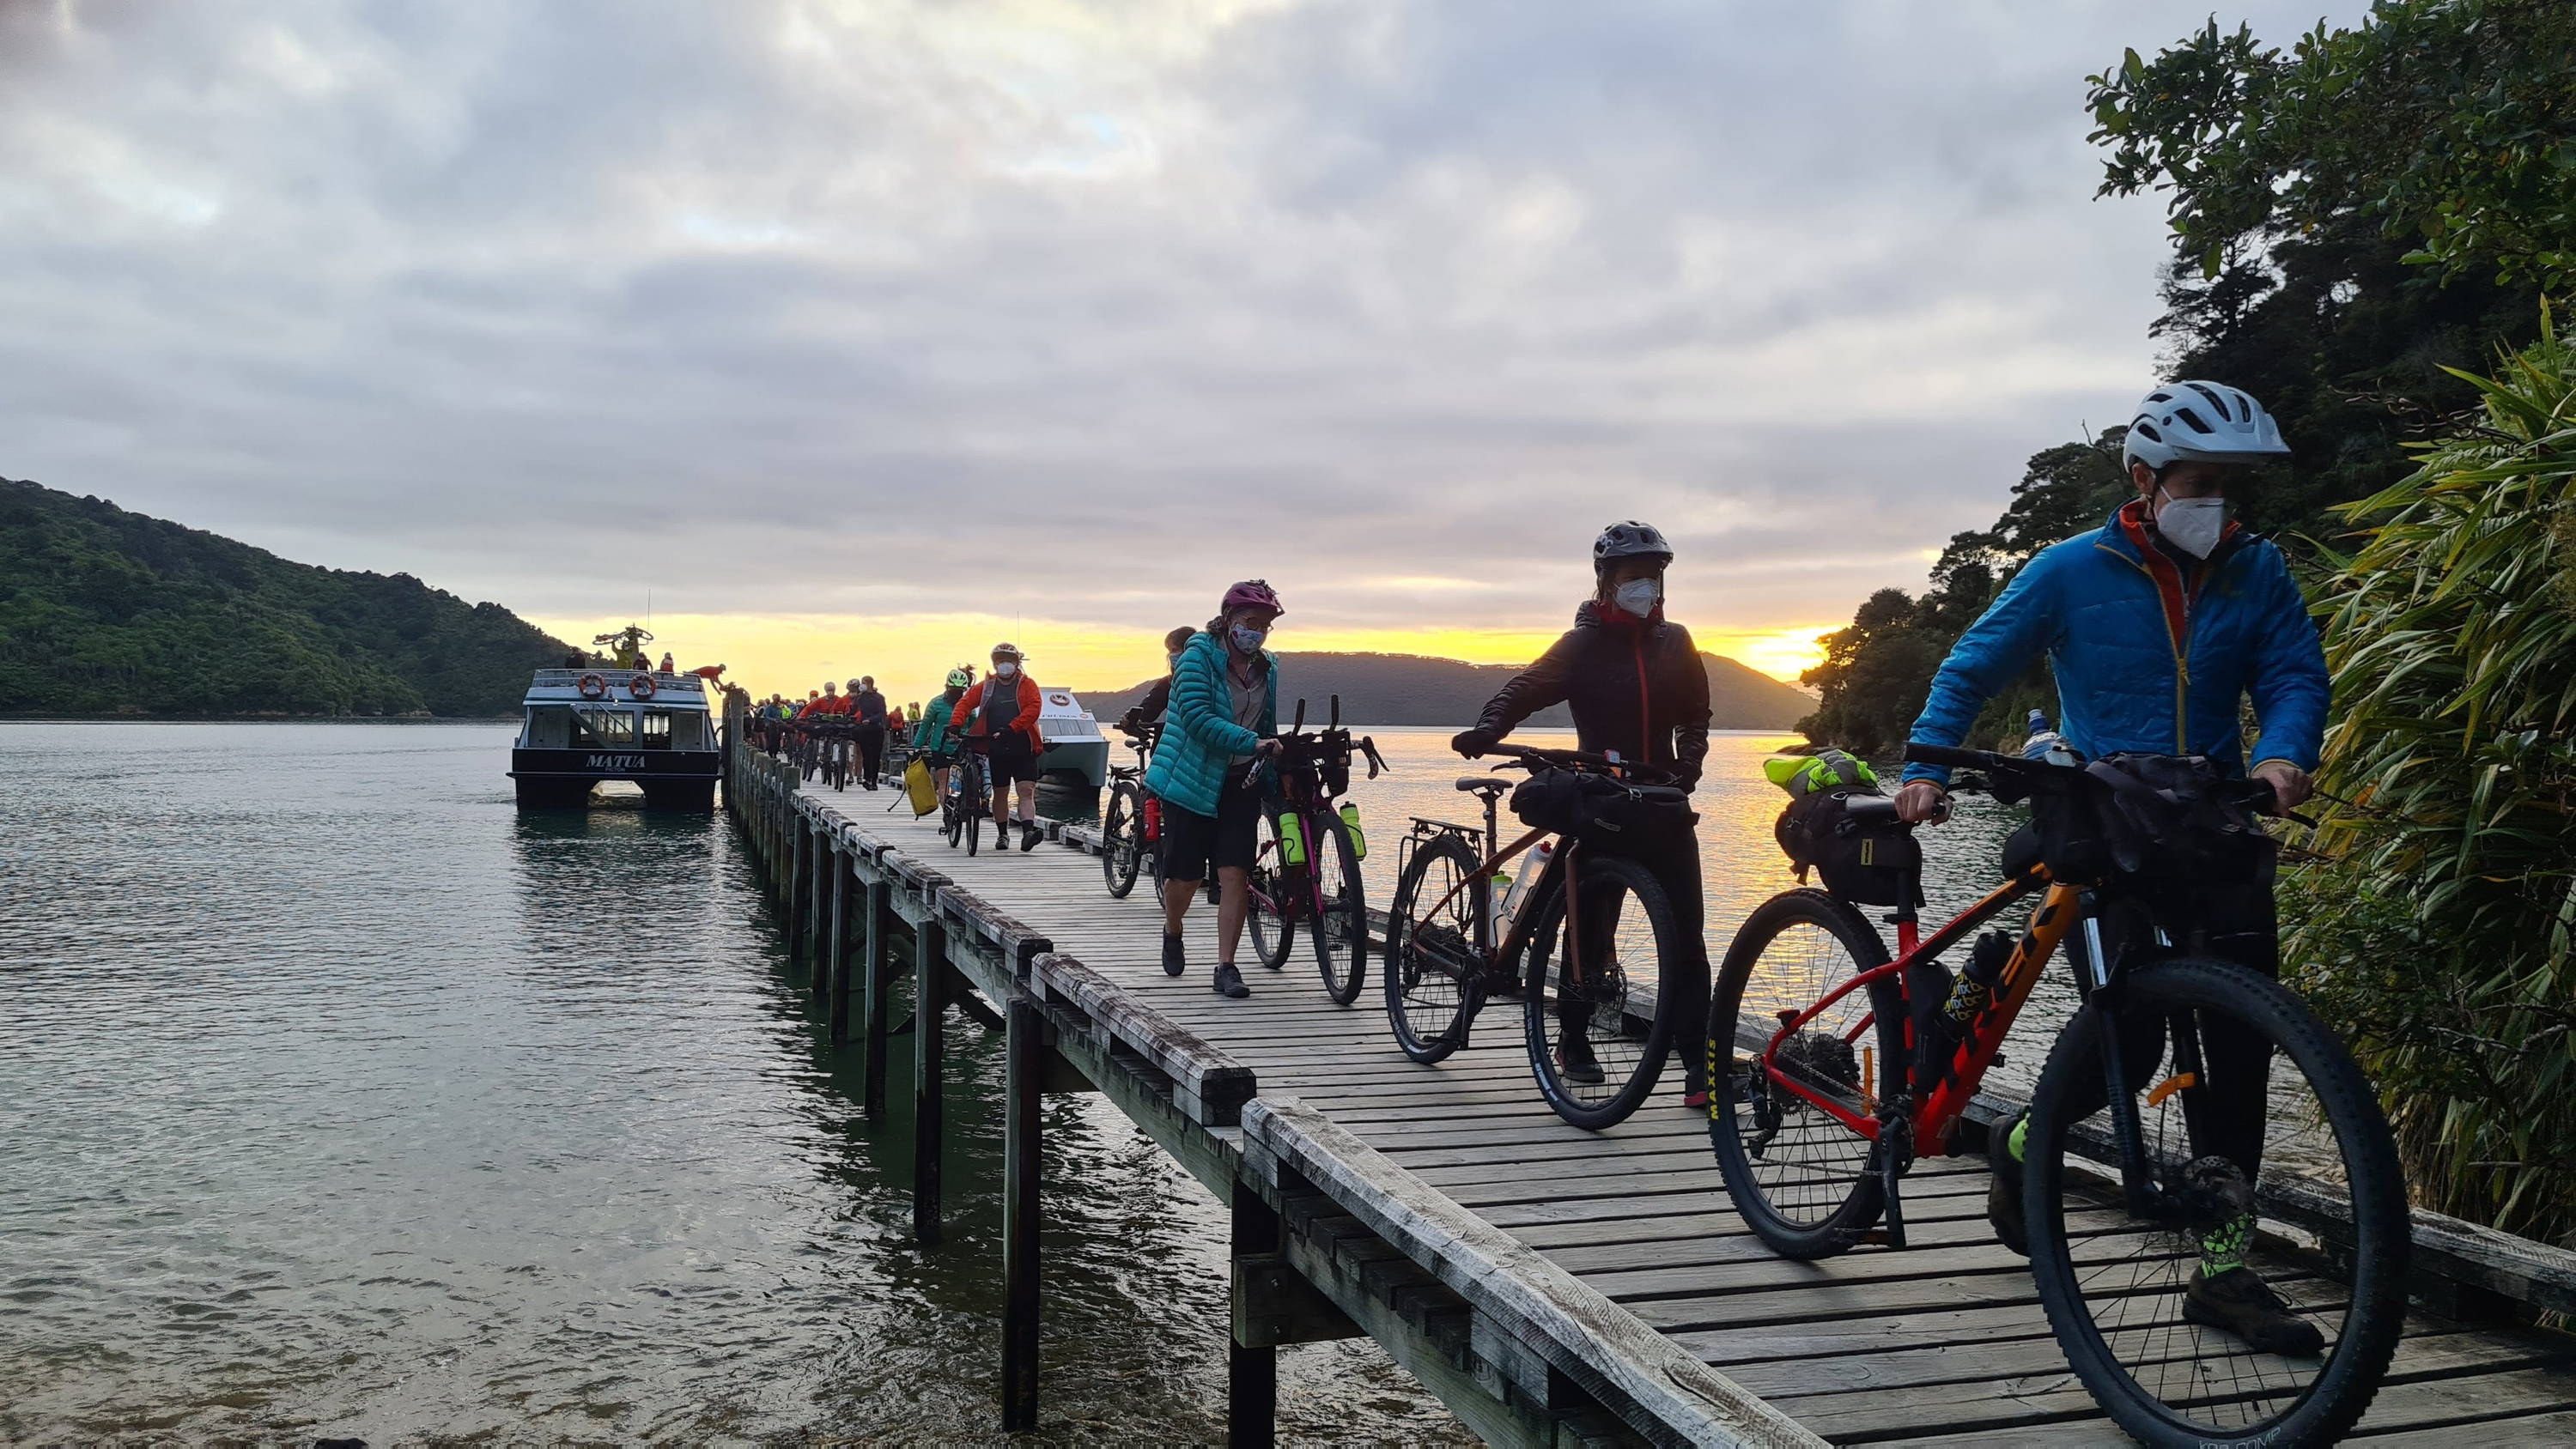 A line of cyclists walk their bikes across a boat dock toward the shore in early dawn.